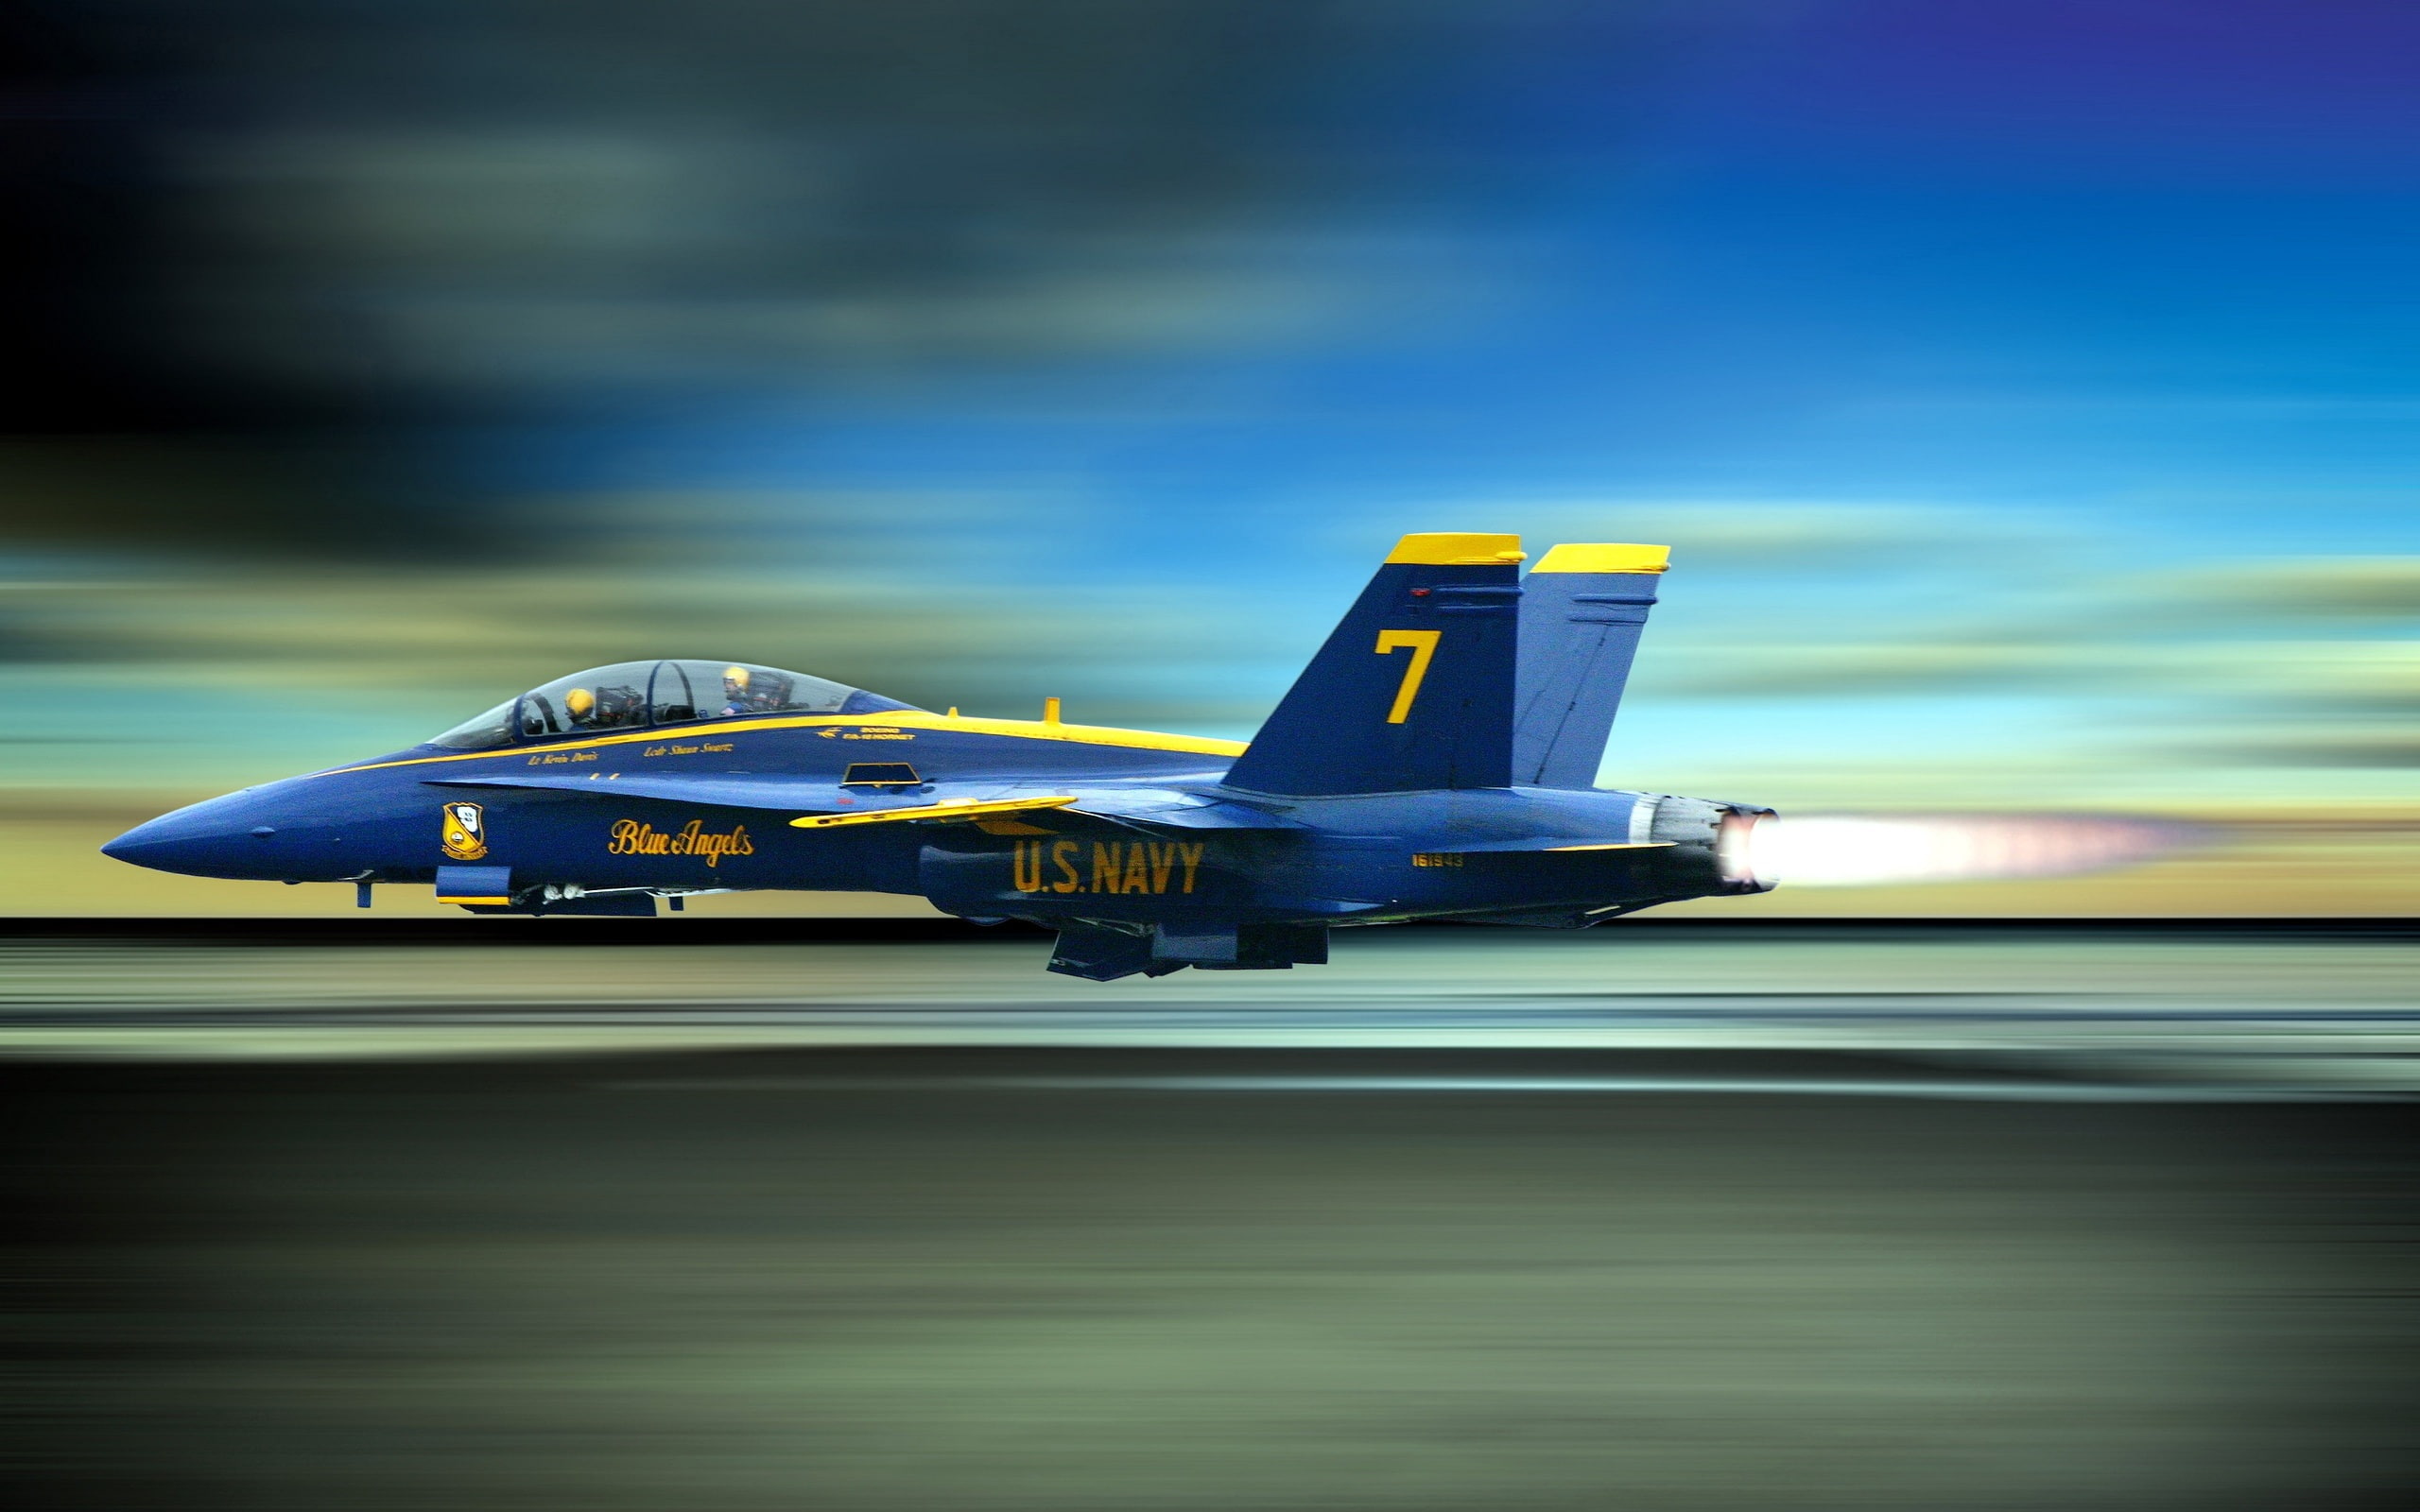 Blue Angels, the high-speed flying fighter